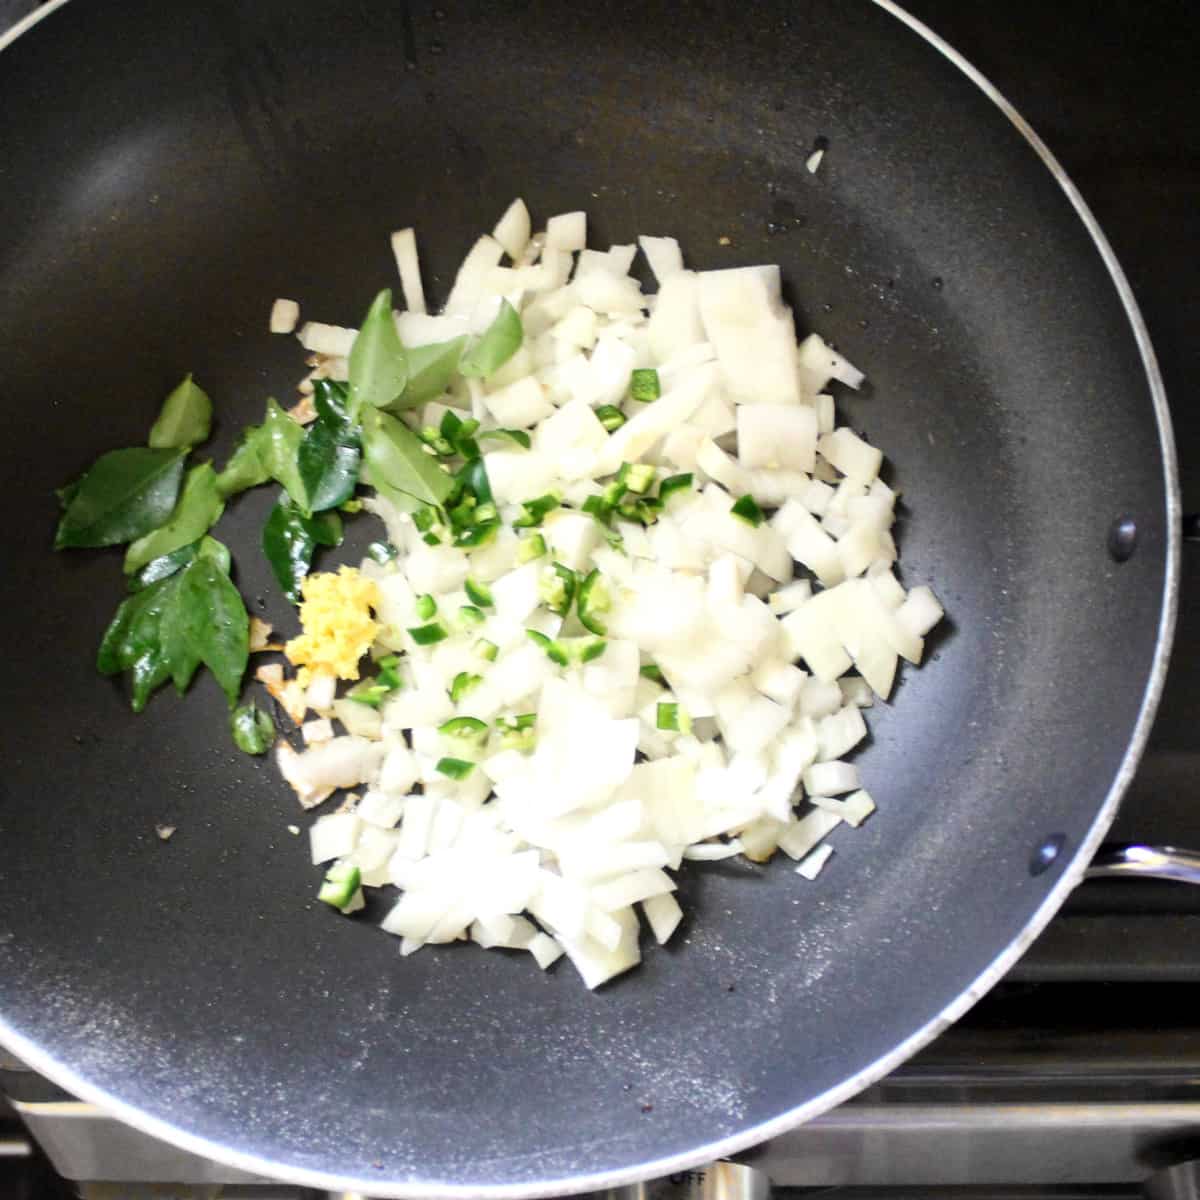 Onions, curry leaves, cilantro and green chili peppers in a wok